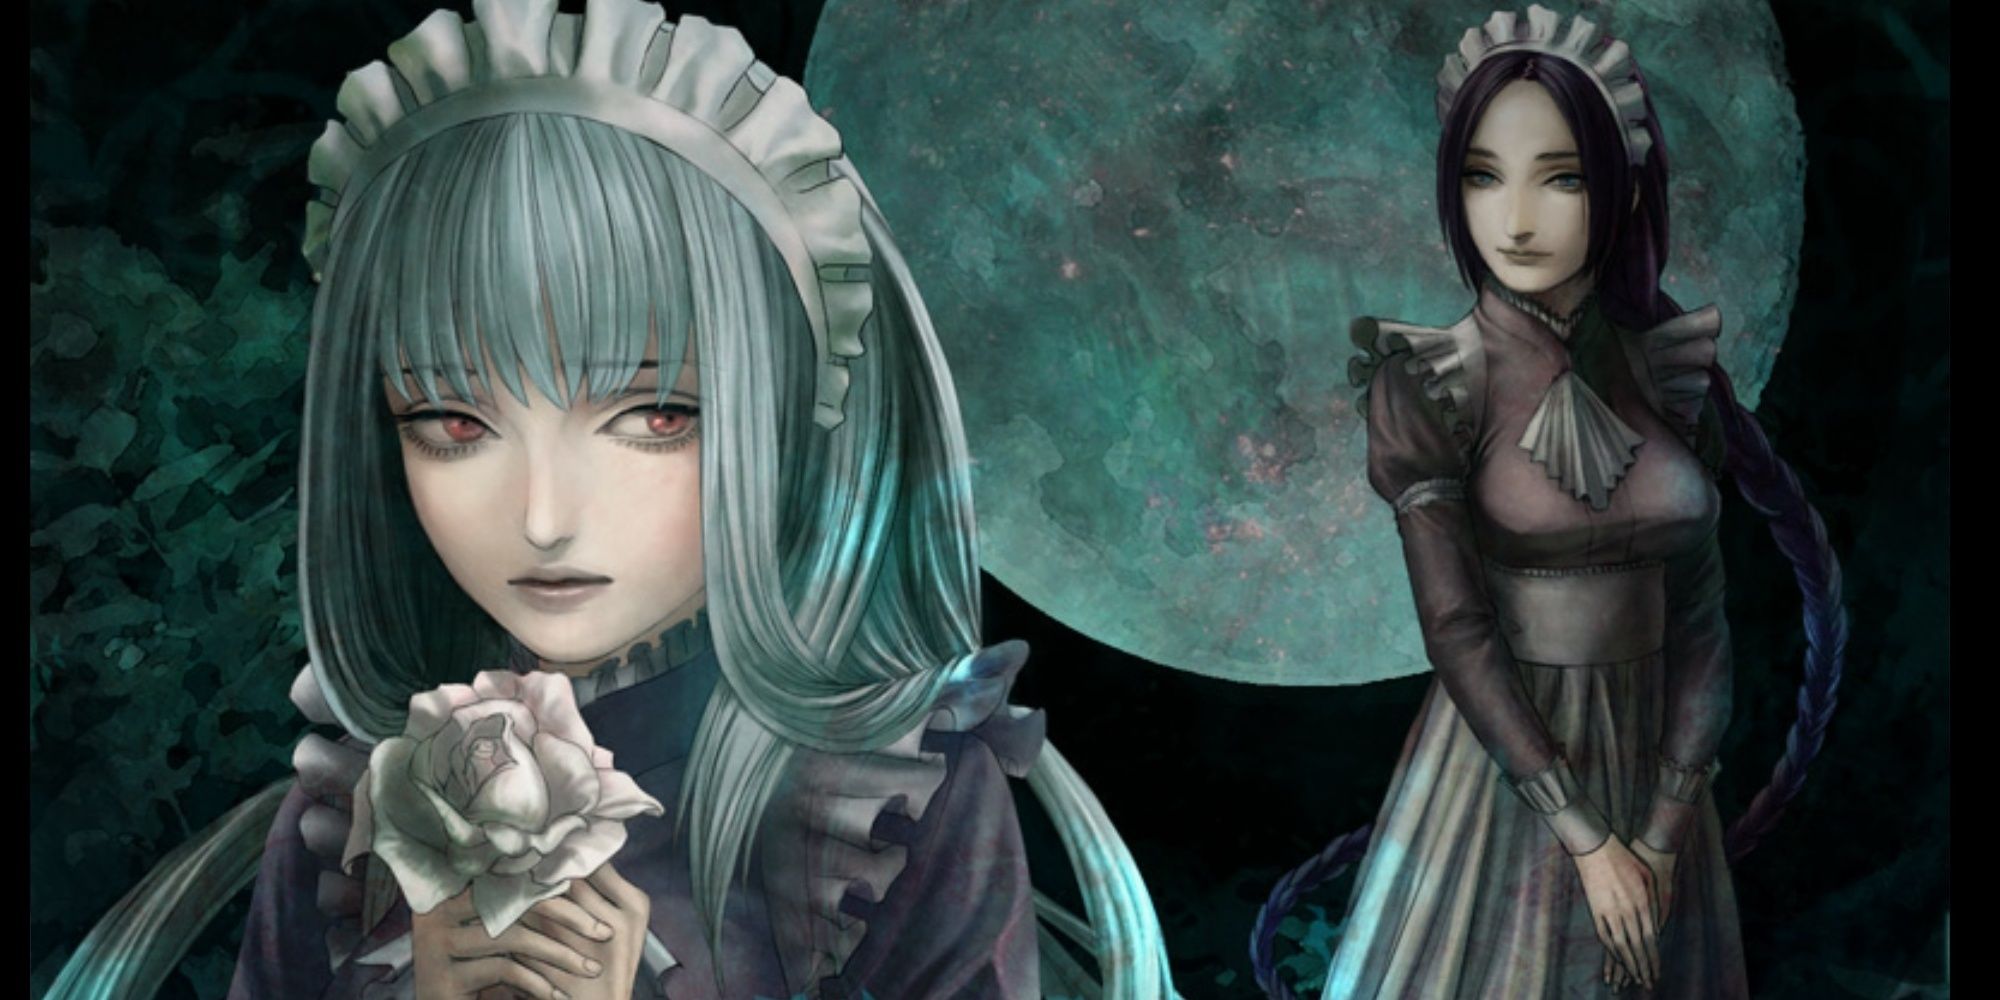 The Maid and Giselle from The House In Fata Morgana, conversing under the moonlight.